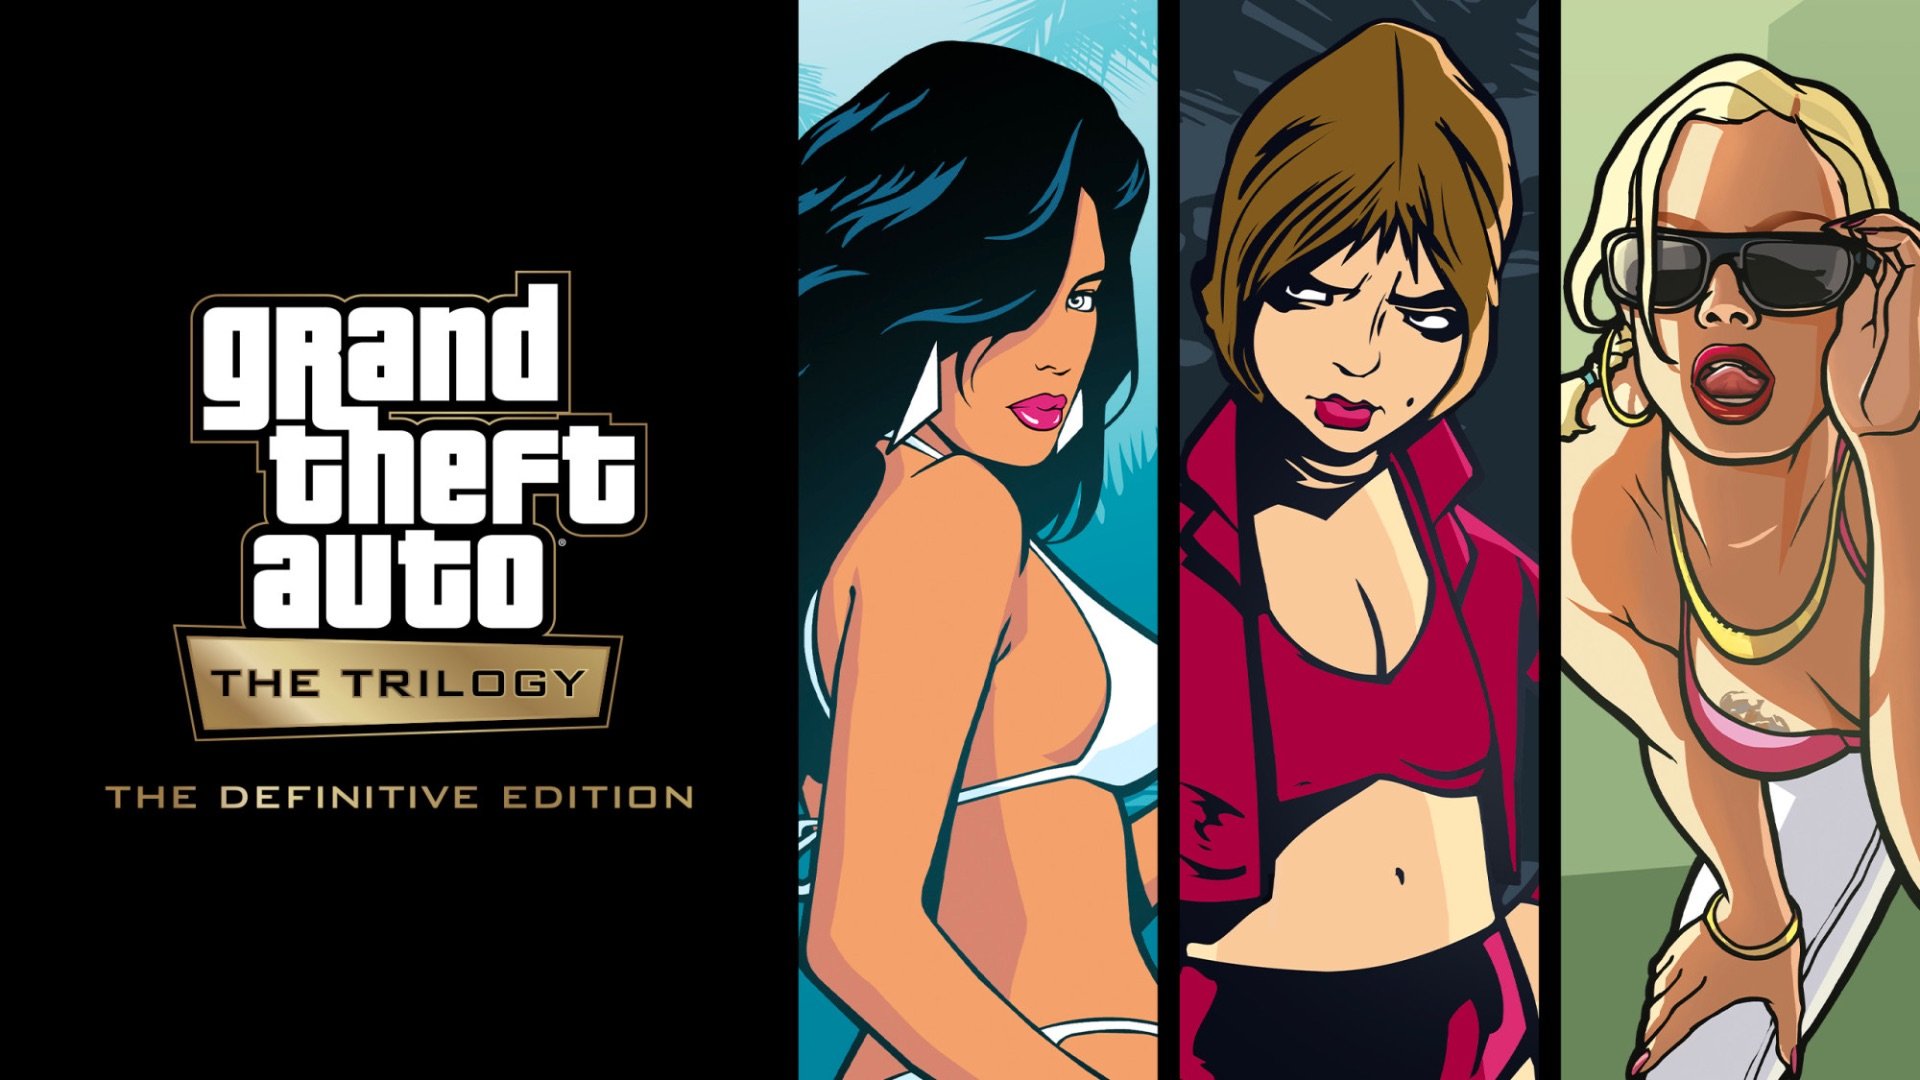 Tips Grand Theft Auto III APK pour Android Télécharger